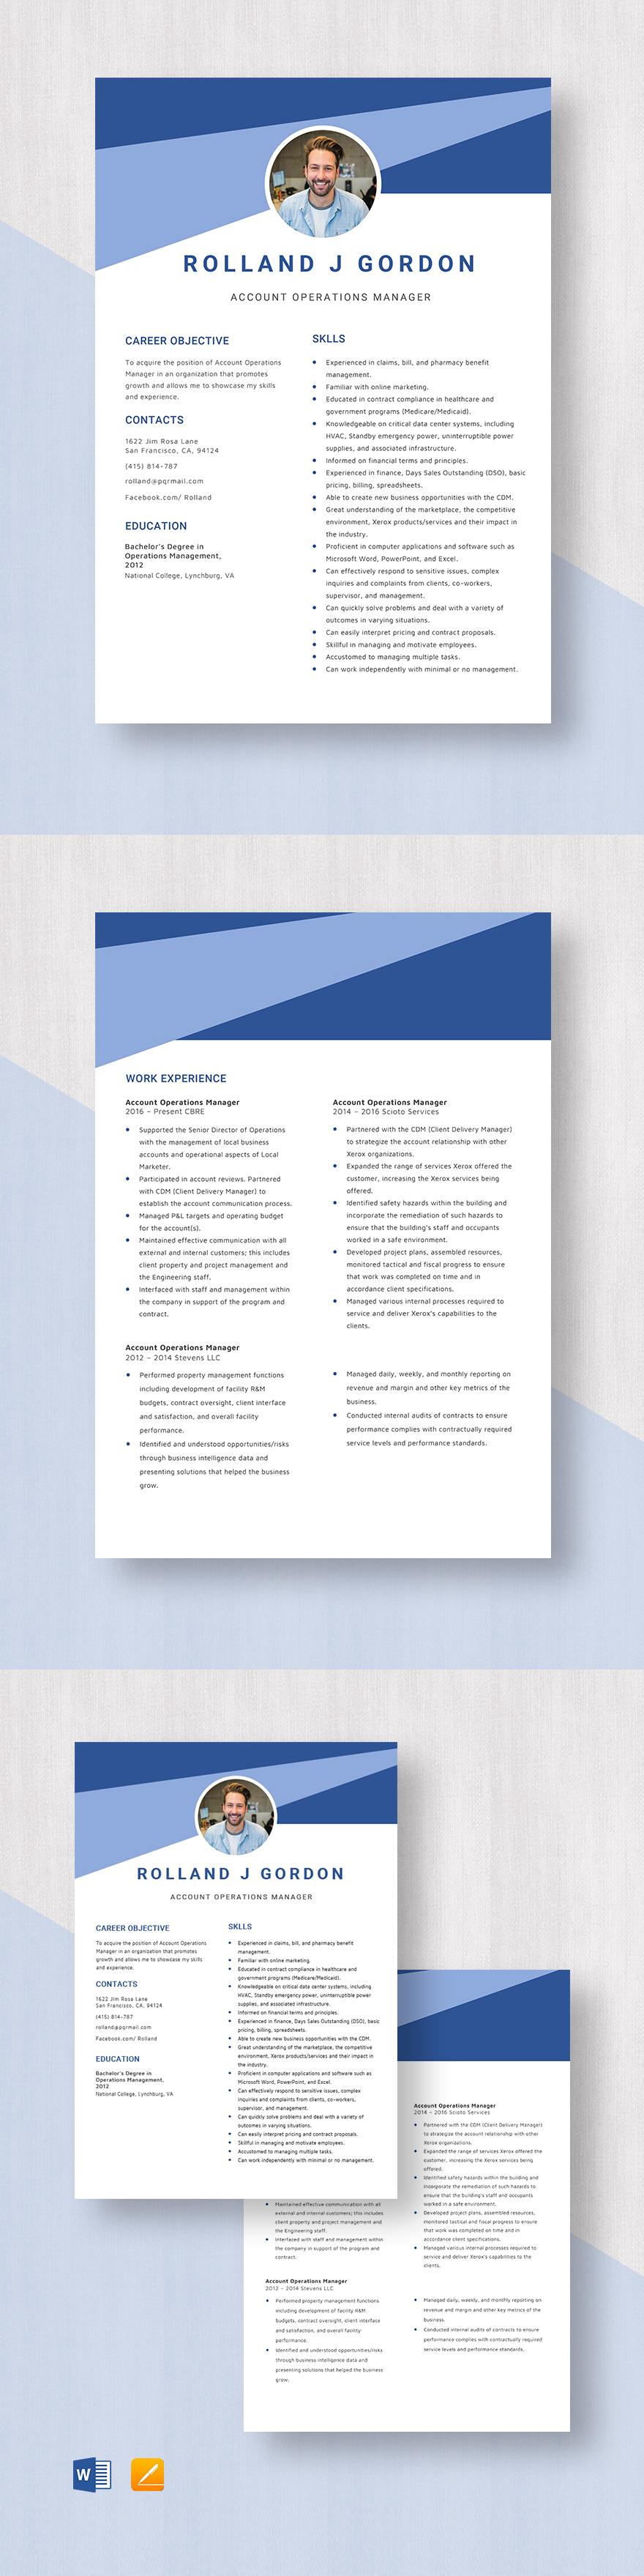 Account Operations Manager Resume Template